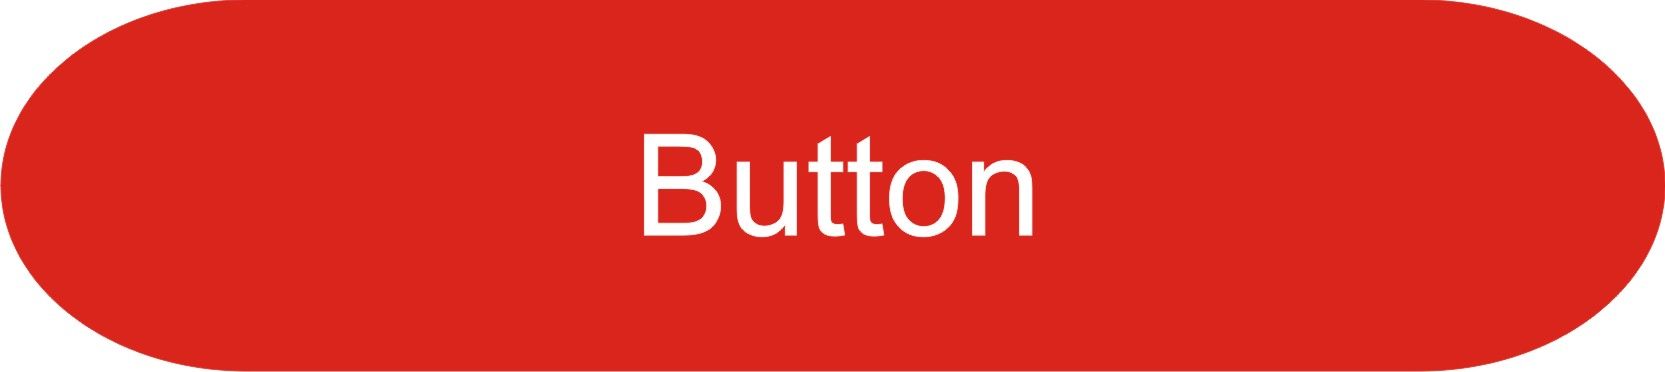 A rounded button